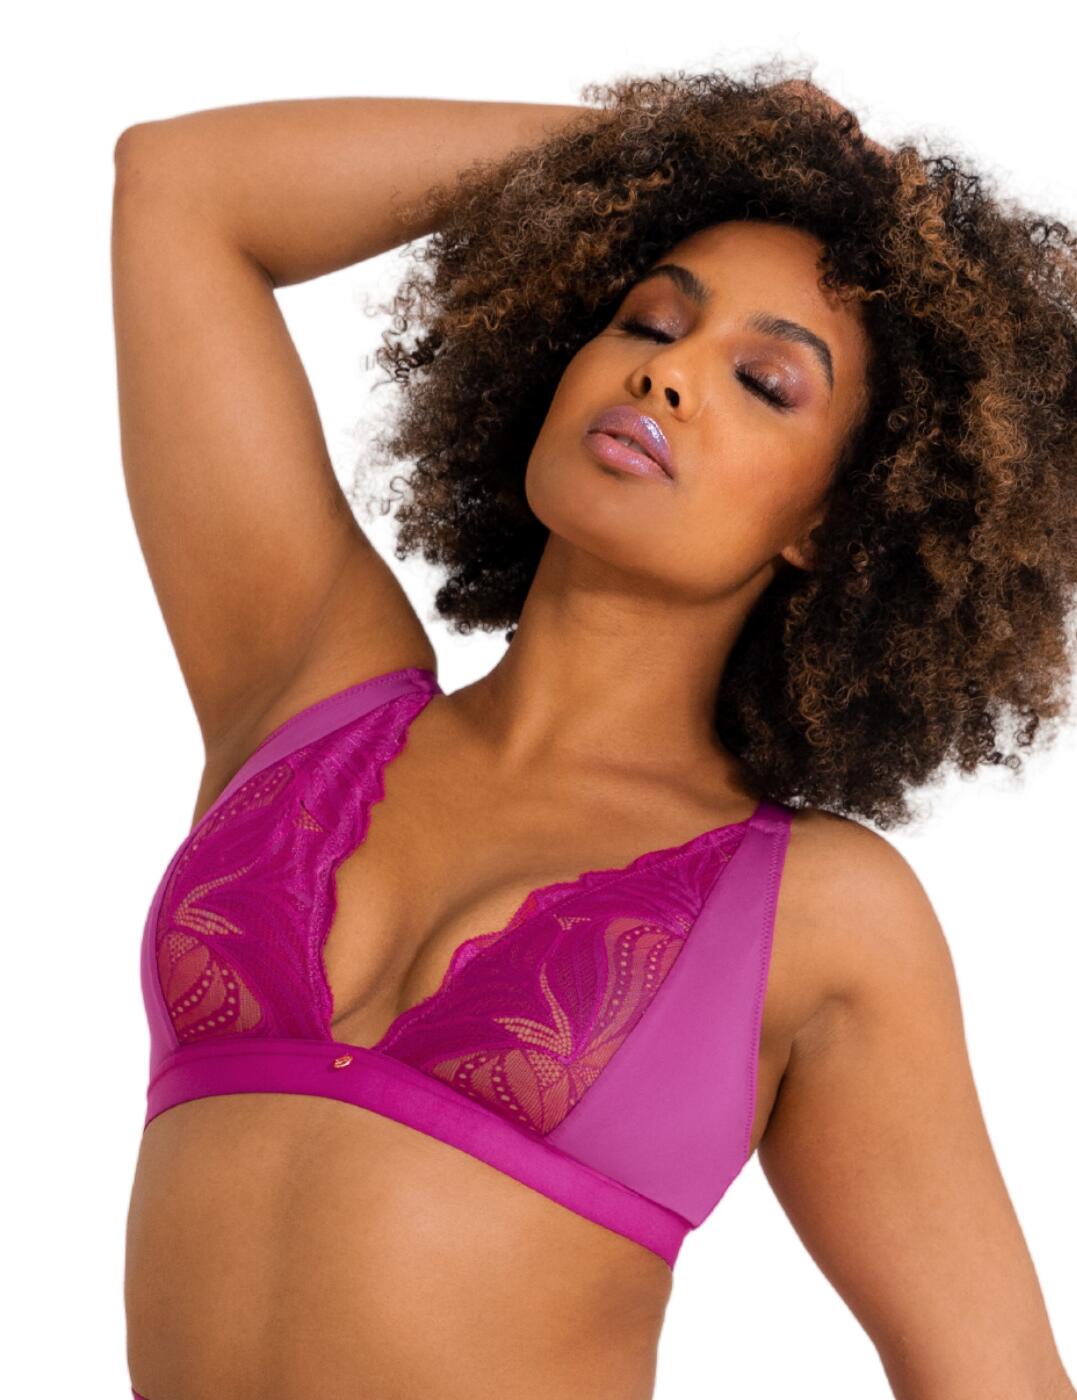 Scantilly by Curvy Kate Indulgence Bralette Bra ST010110 Womens Sexy  Lingerie